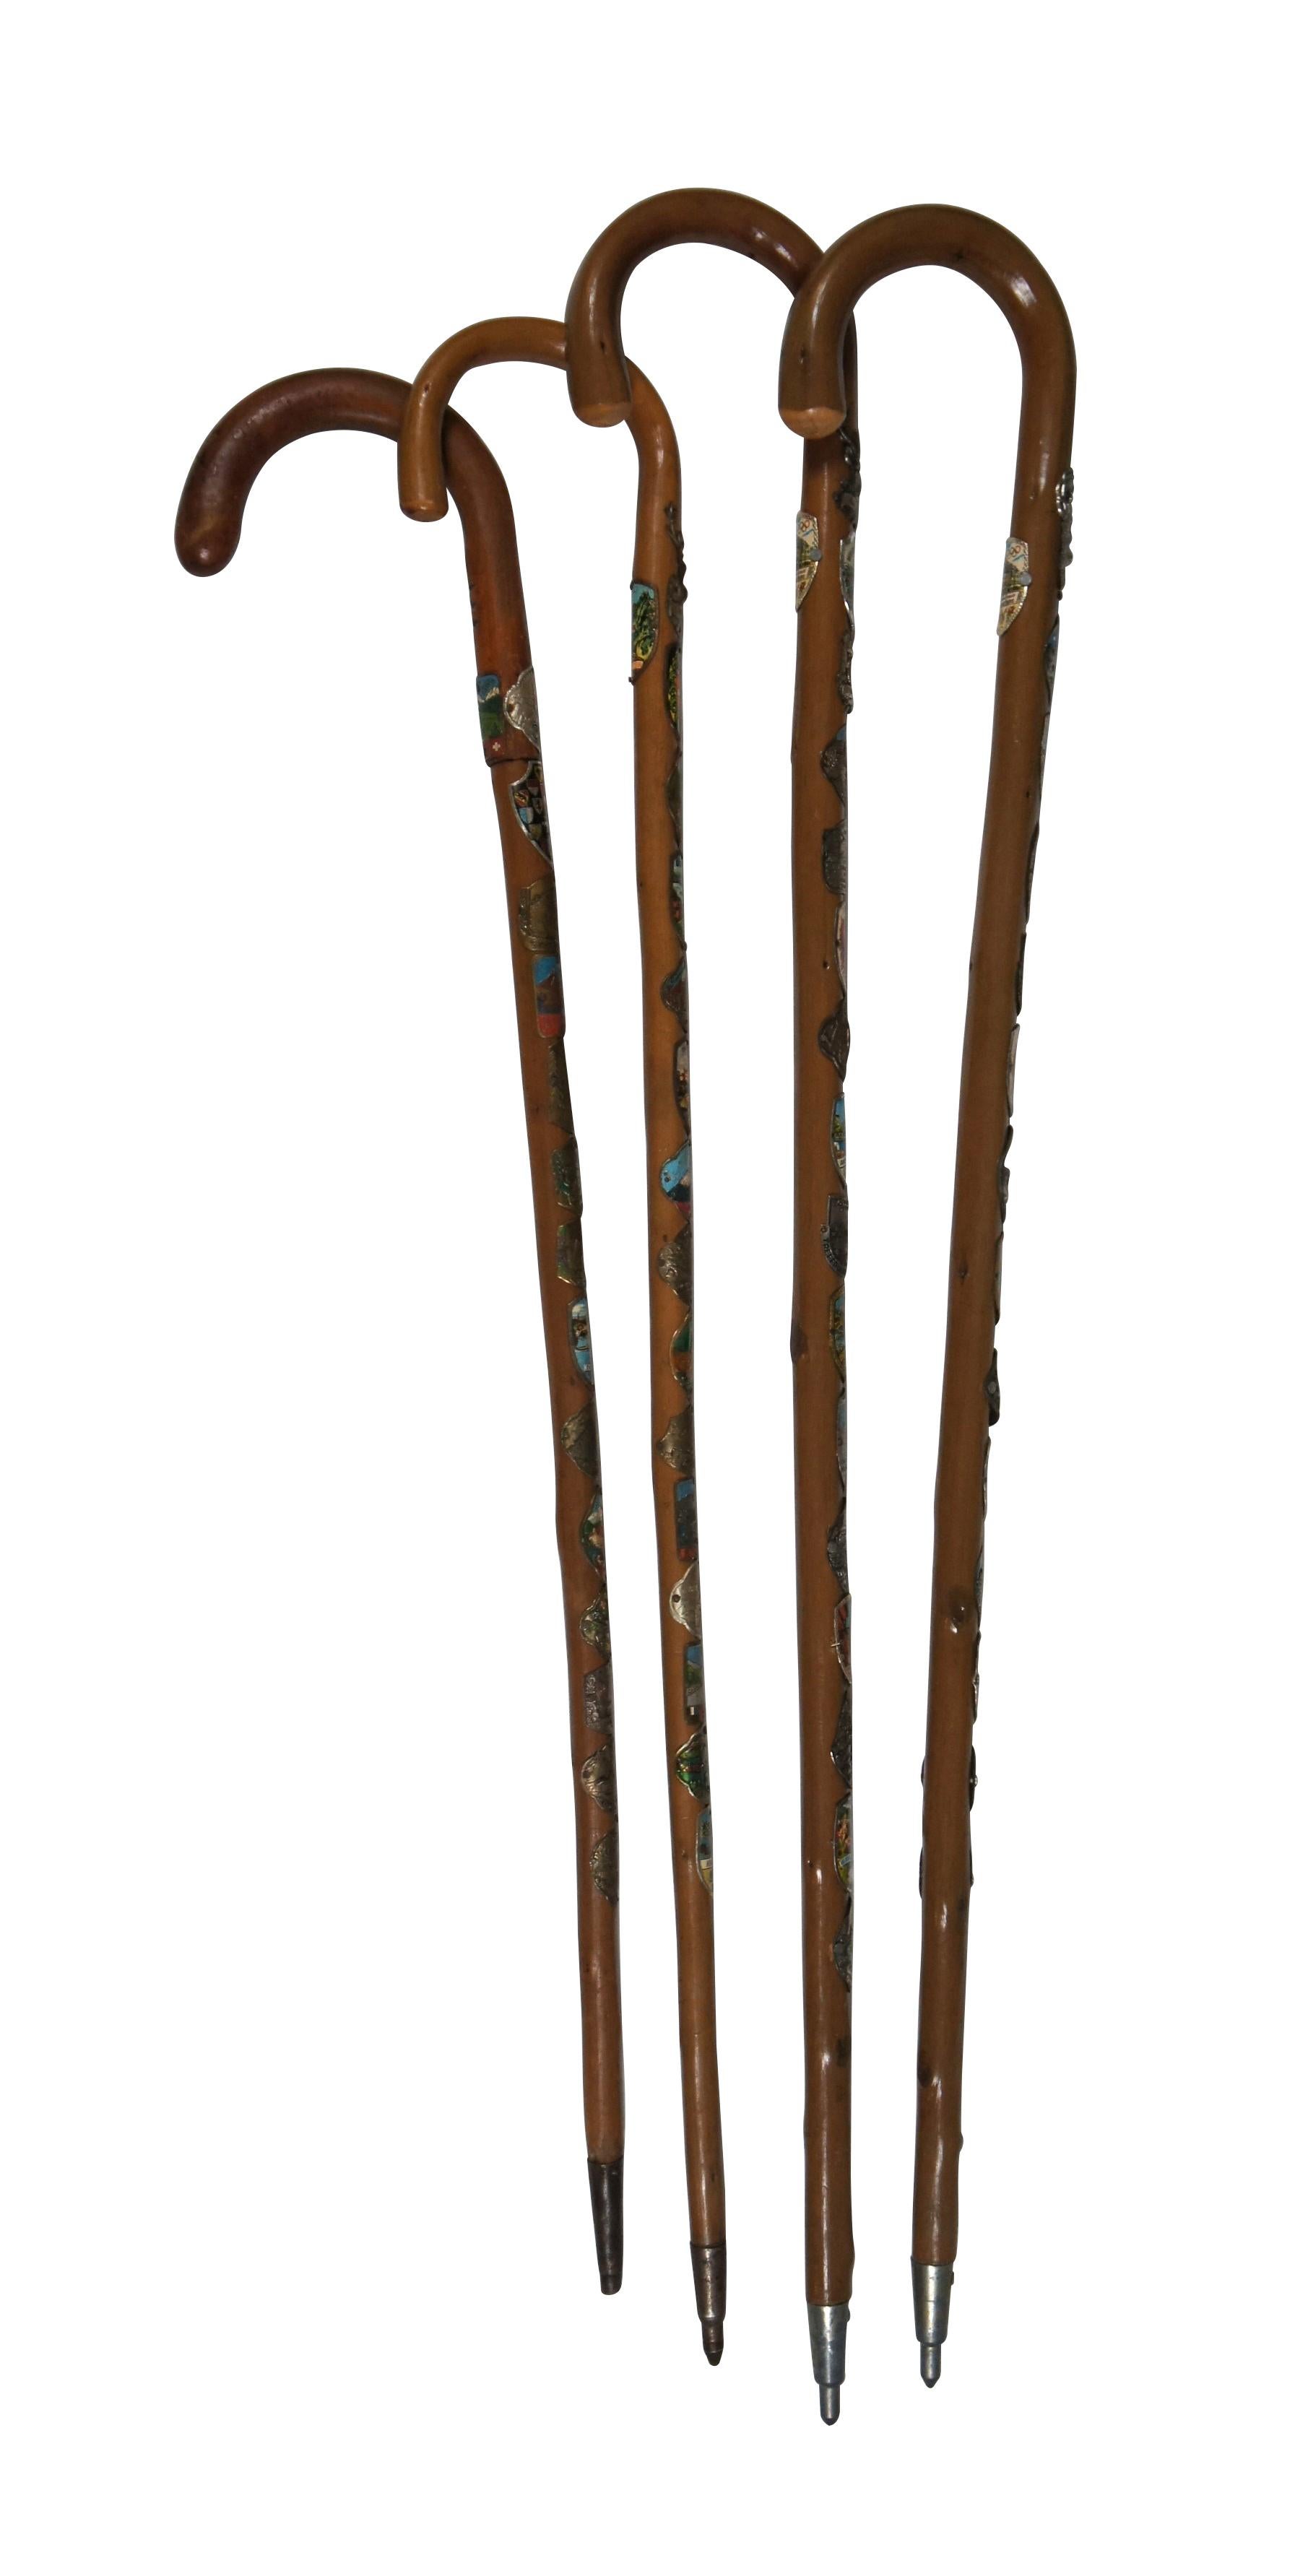 Lot of four vintage German / Austrian folk art traditional hook style walking sticks / canes, embellished with German and other assorted European hiking souvenir badges. 63 total badges across the four canes with several repeats. Olympics, Munchen,